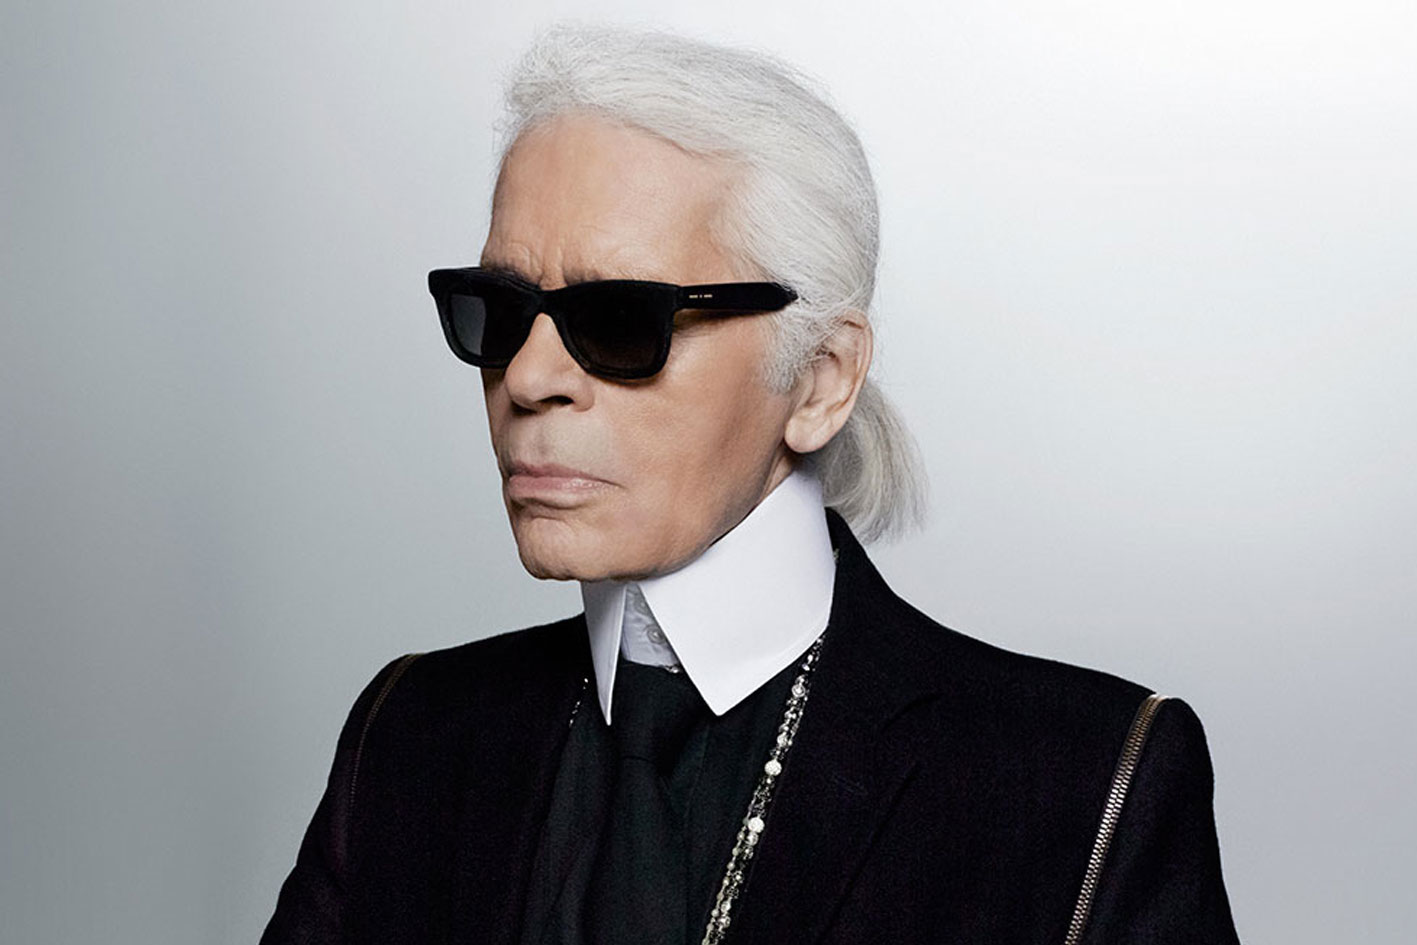 Diseñadores rinden tributo a Karl Lagerfeld